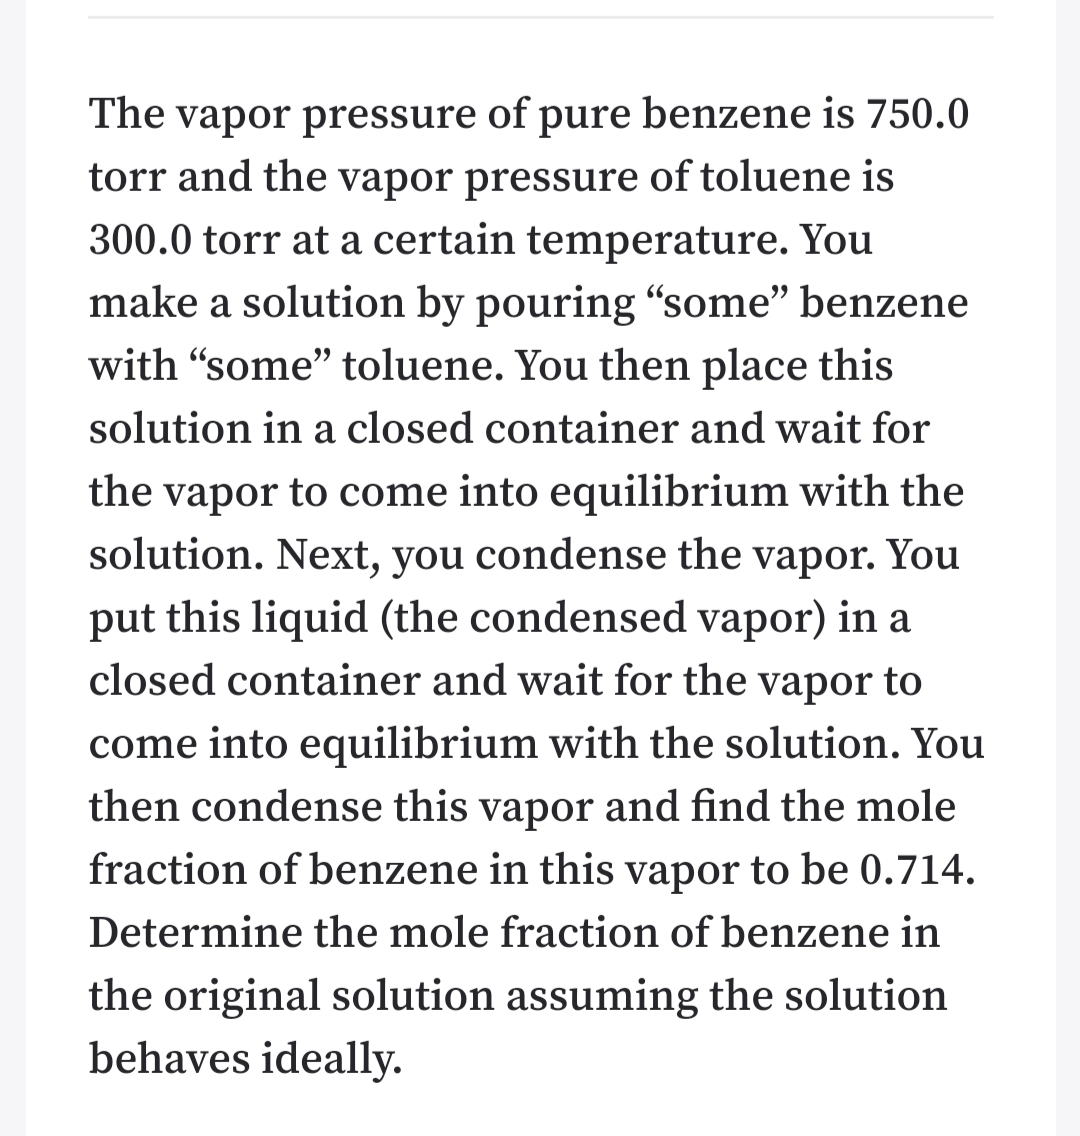 The vapor pressure of pure benzene is 750.0
torr and the vapor pressure of toluene is
300.0 torr at a certain temperature. You
make a solution by pouring “some" benzene
with "some" toluene. You then place this
solution in a closed container and wait for
the vapor to come into equilibrium with the
solution. Next, you condense the vapor. You
put this liquid (the condensed vapor) in a
closed container and wait for the vapor to
come into equilibrium with the solution. You
then condense this vapor and find the mole
fraction of benzene in this vapor to be 0.714.
Determine the mole fraction of benzene in
the original solution assuming the solution
behaves ideally.
